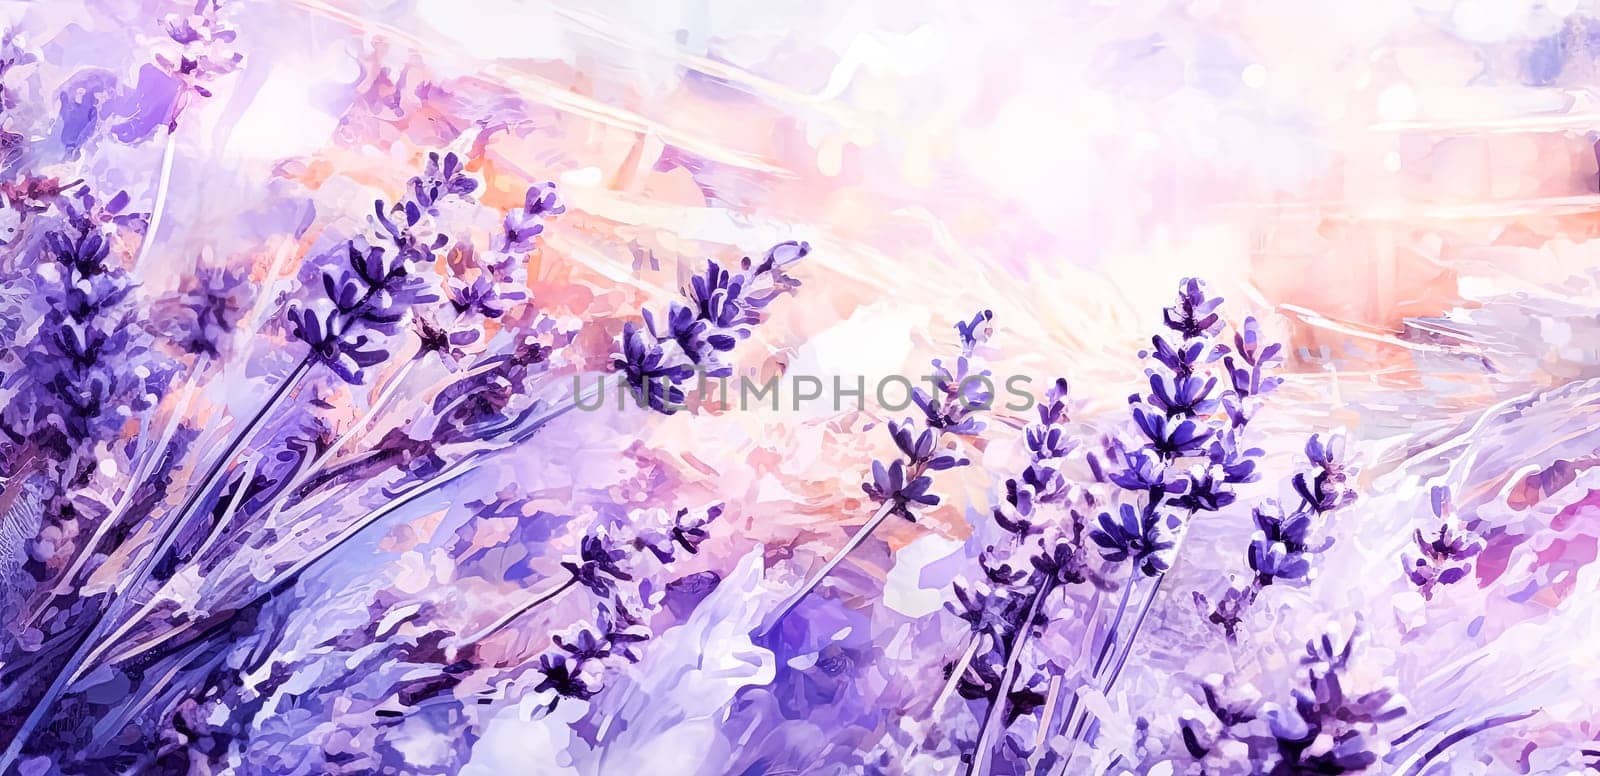 Vintage style watercolor illustration of lavender flowers isolated on a white background. Elegant depiction perfect for various design purposes.